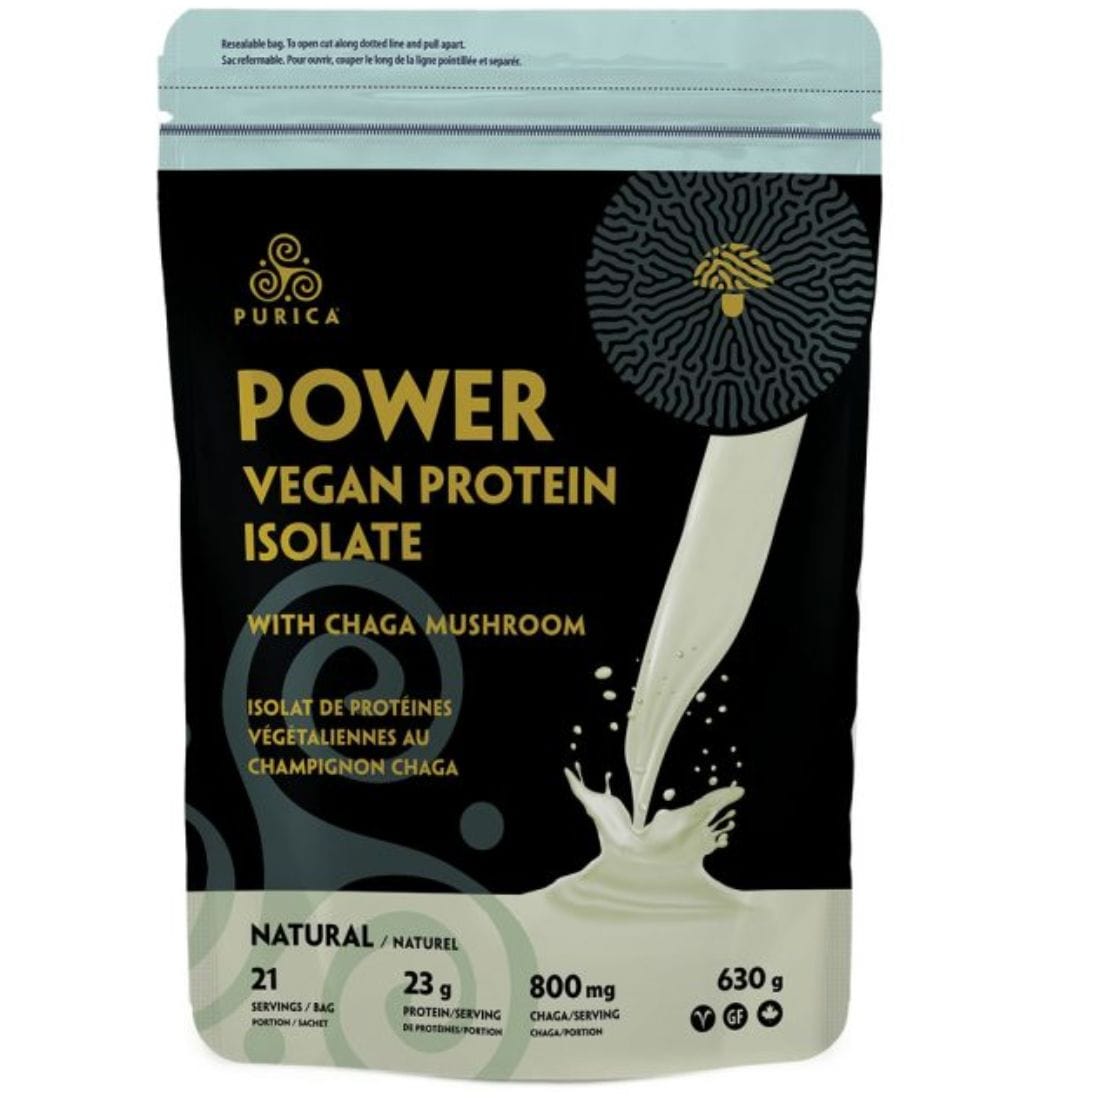 Purica Power Vegan Protein Isolate with 800mg Organic Chaga per Serving, 630g